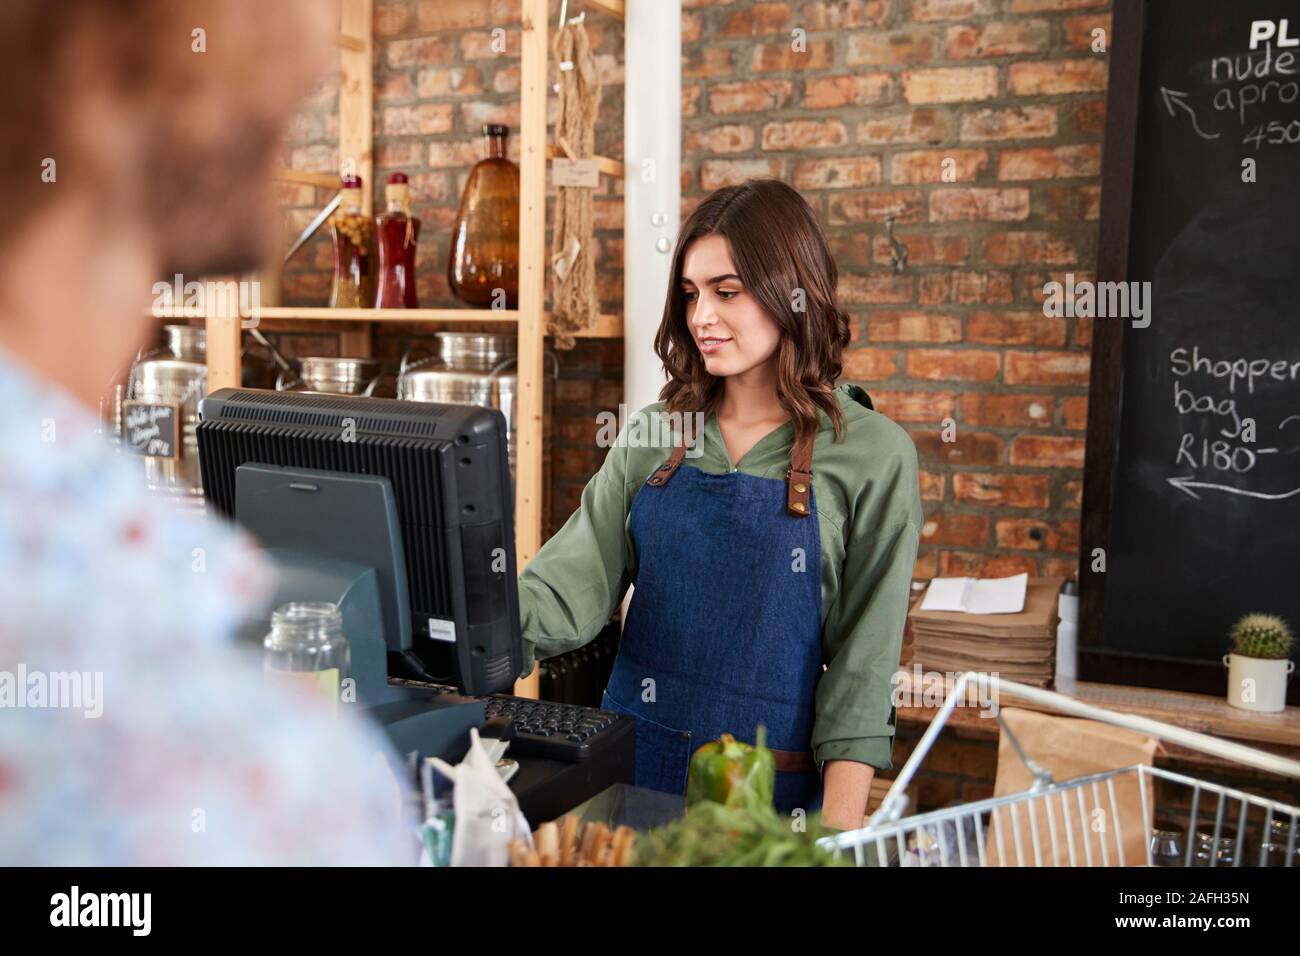 Customer Paying For Shopping At Checkout Of Sustainable Plastic Free Grocery Store Stock Photo